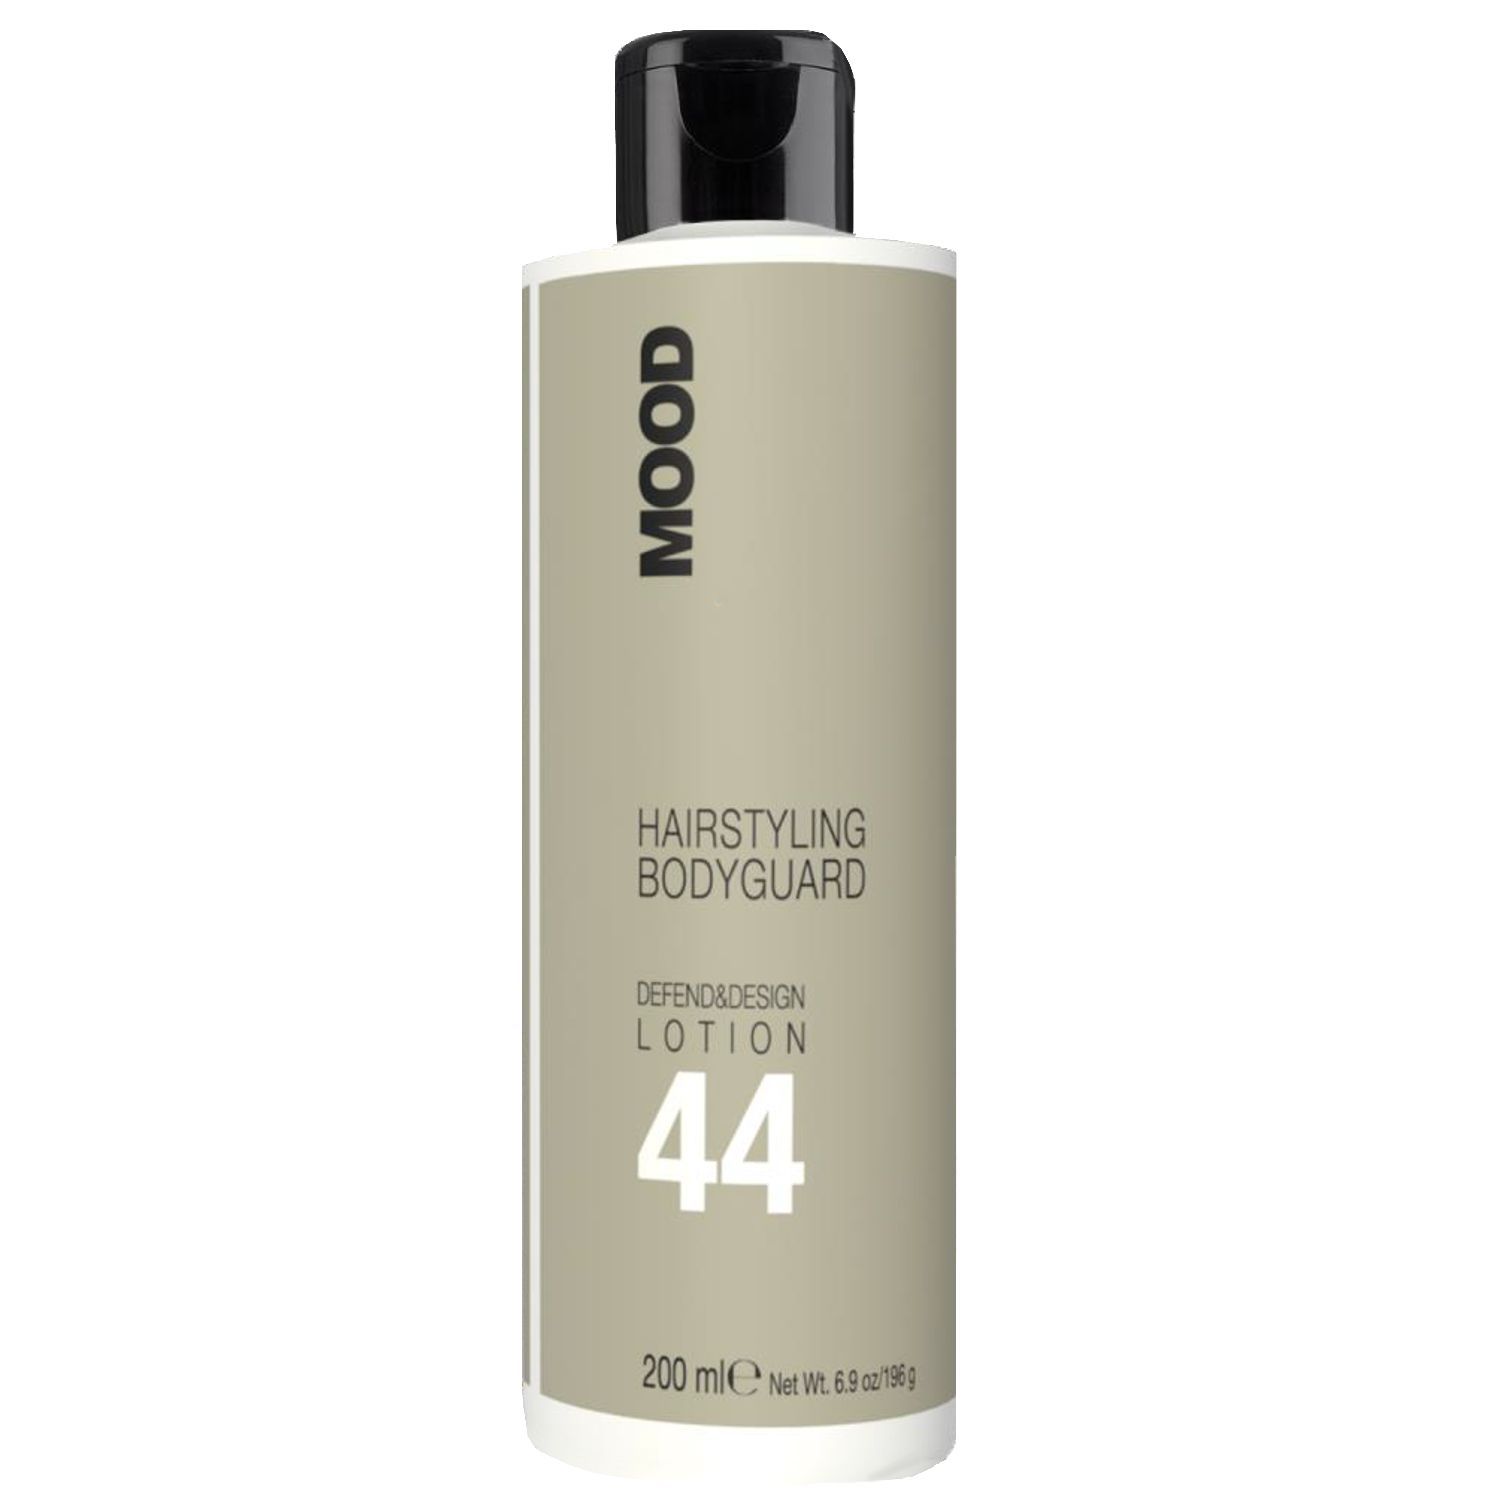 MOOD Hairstyling Bodyguard Defend&Design Lotion 200 ml